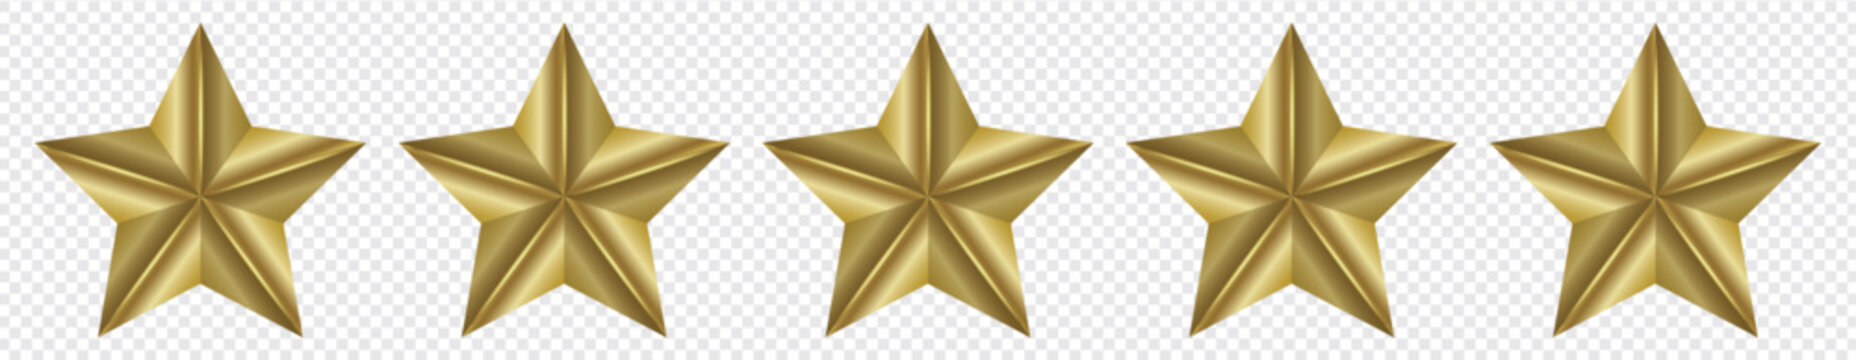 Transparent PNG available
Five golden stars with a 3D effect on a transparent background – Design of five stars that can represent a rating or classification